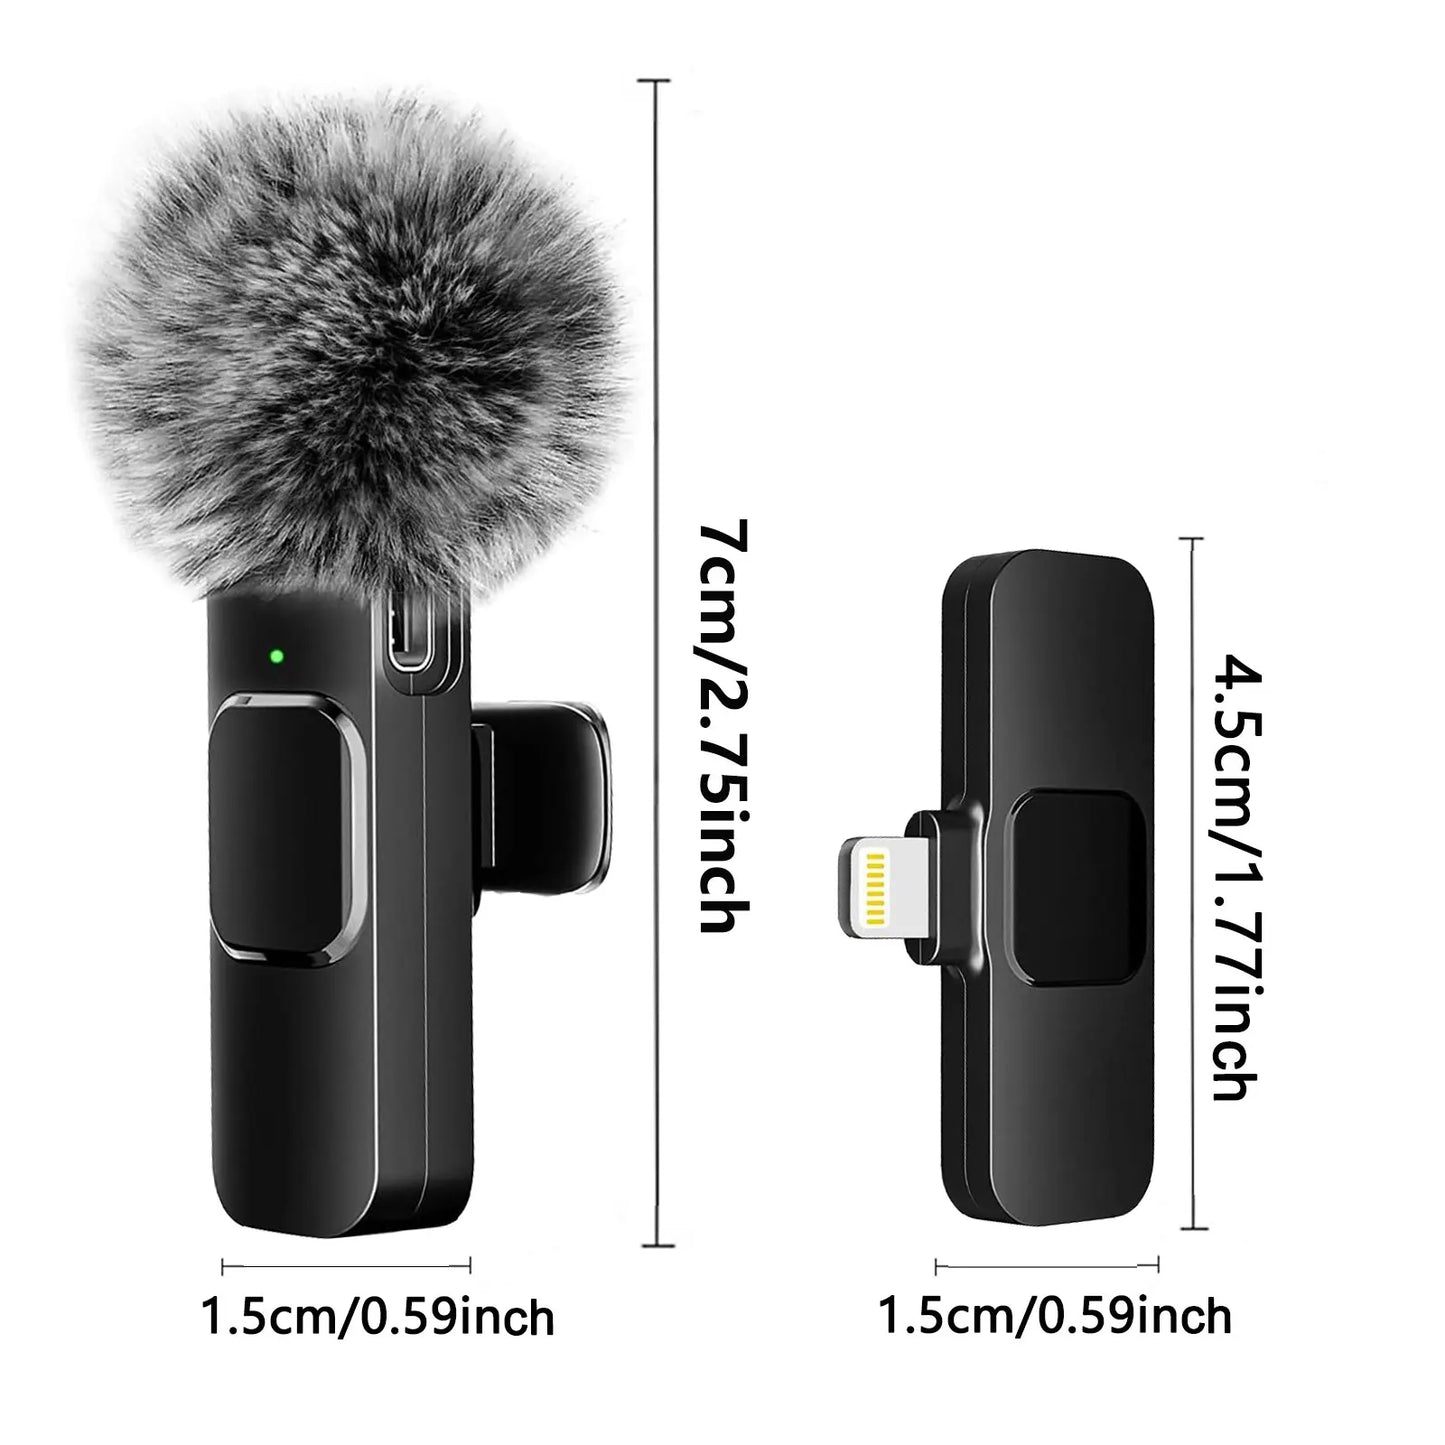 Wireless Lavalier Microphone - Mini Mic for iPhone, Android, Laptop, and Live Gaming